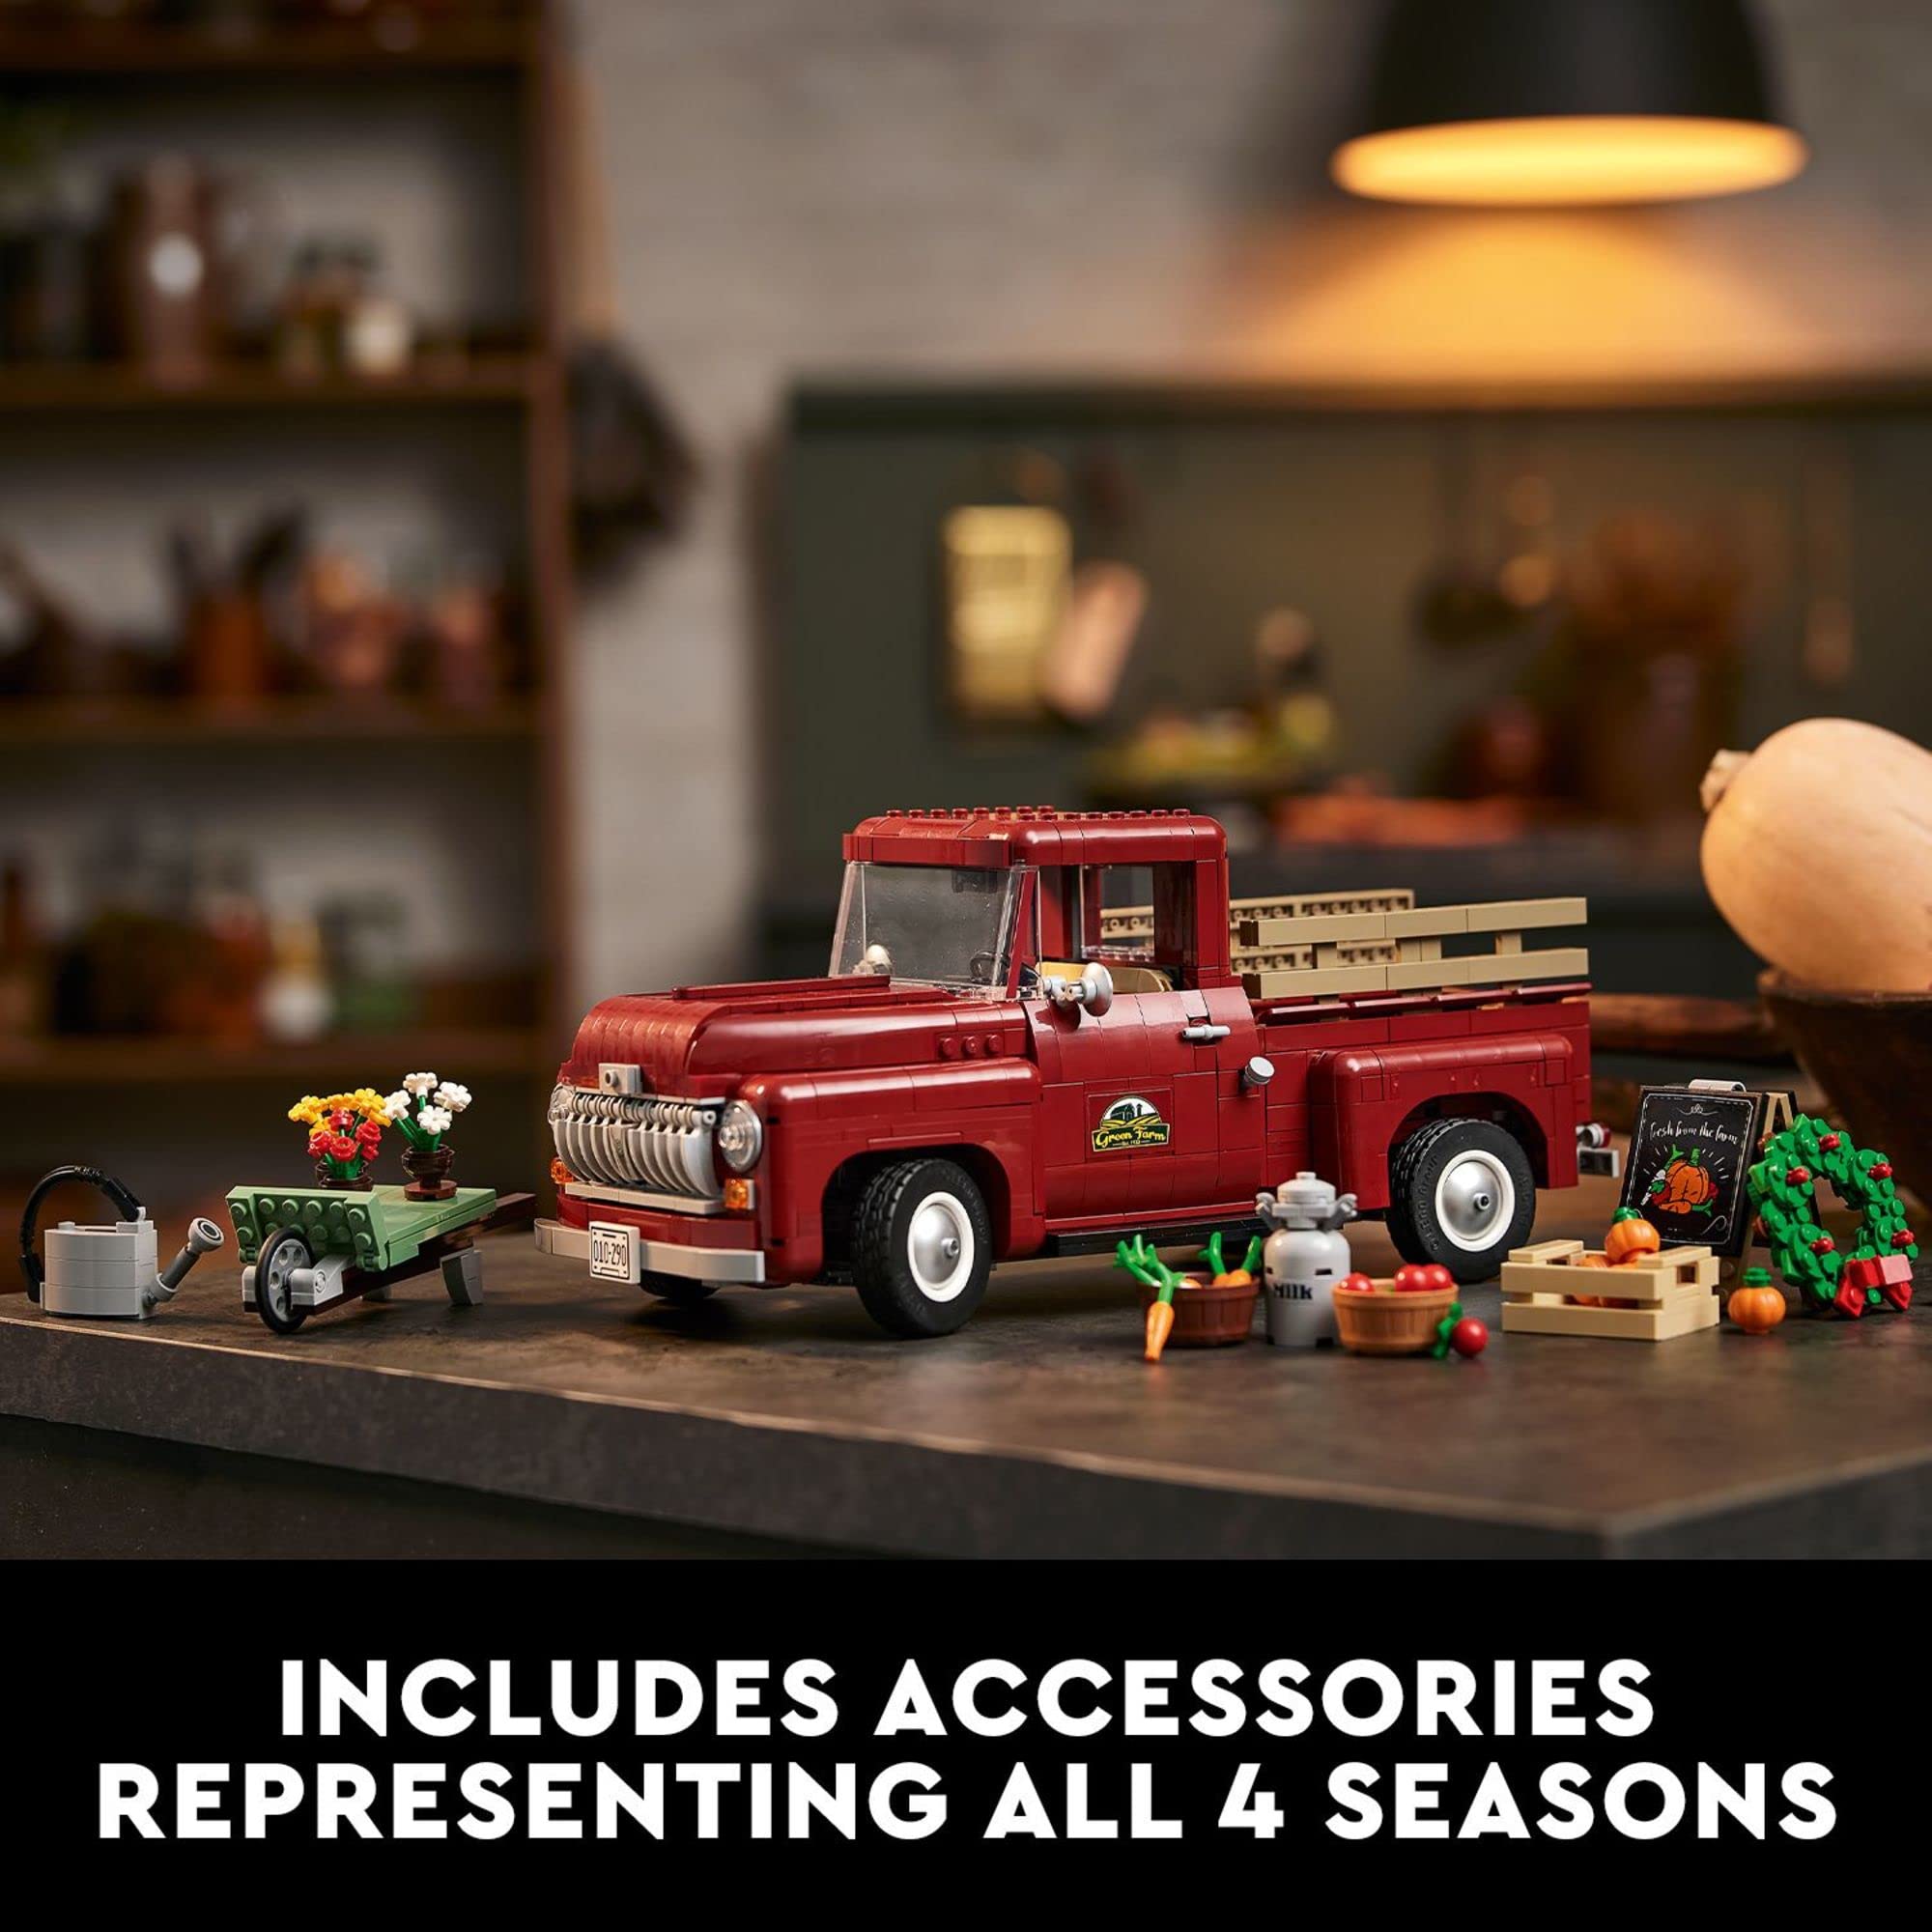 LEGO Icons Pickup Truck 10290 Building Set for Adults, Vintage 1950s Model with Seasonal Display Accessories, Creative Activity, Collector's Gift Idea